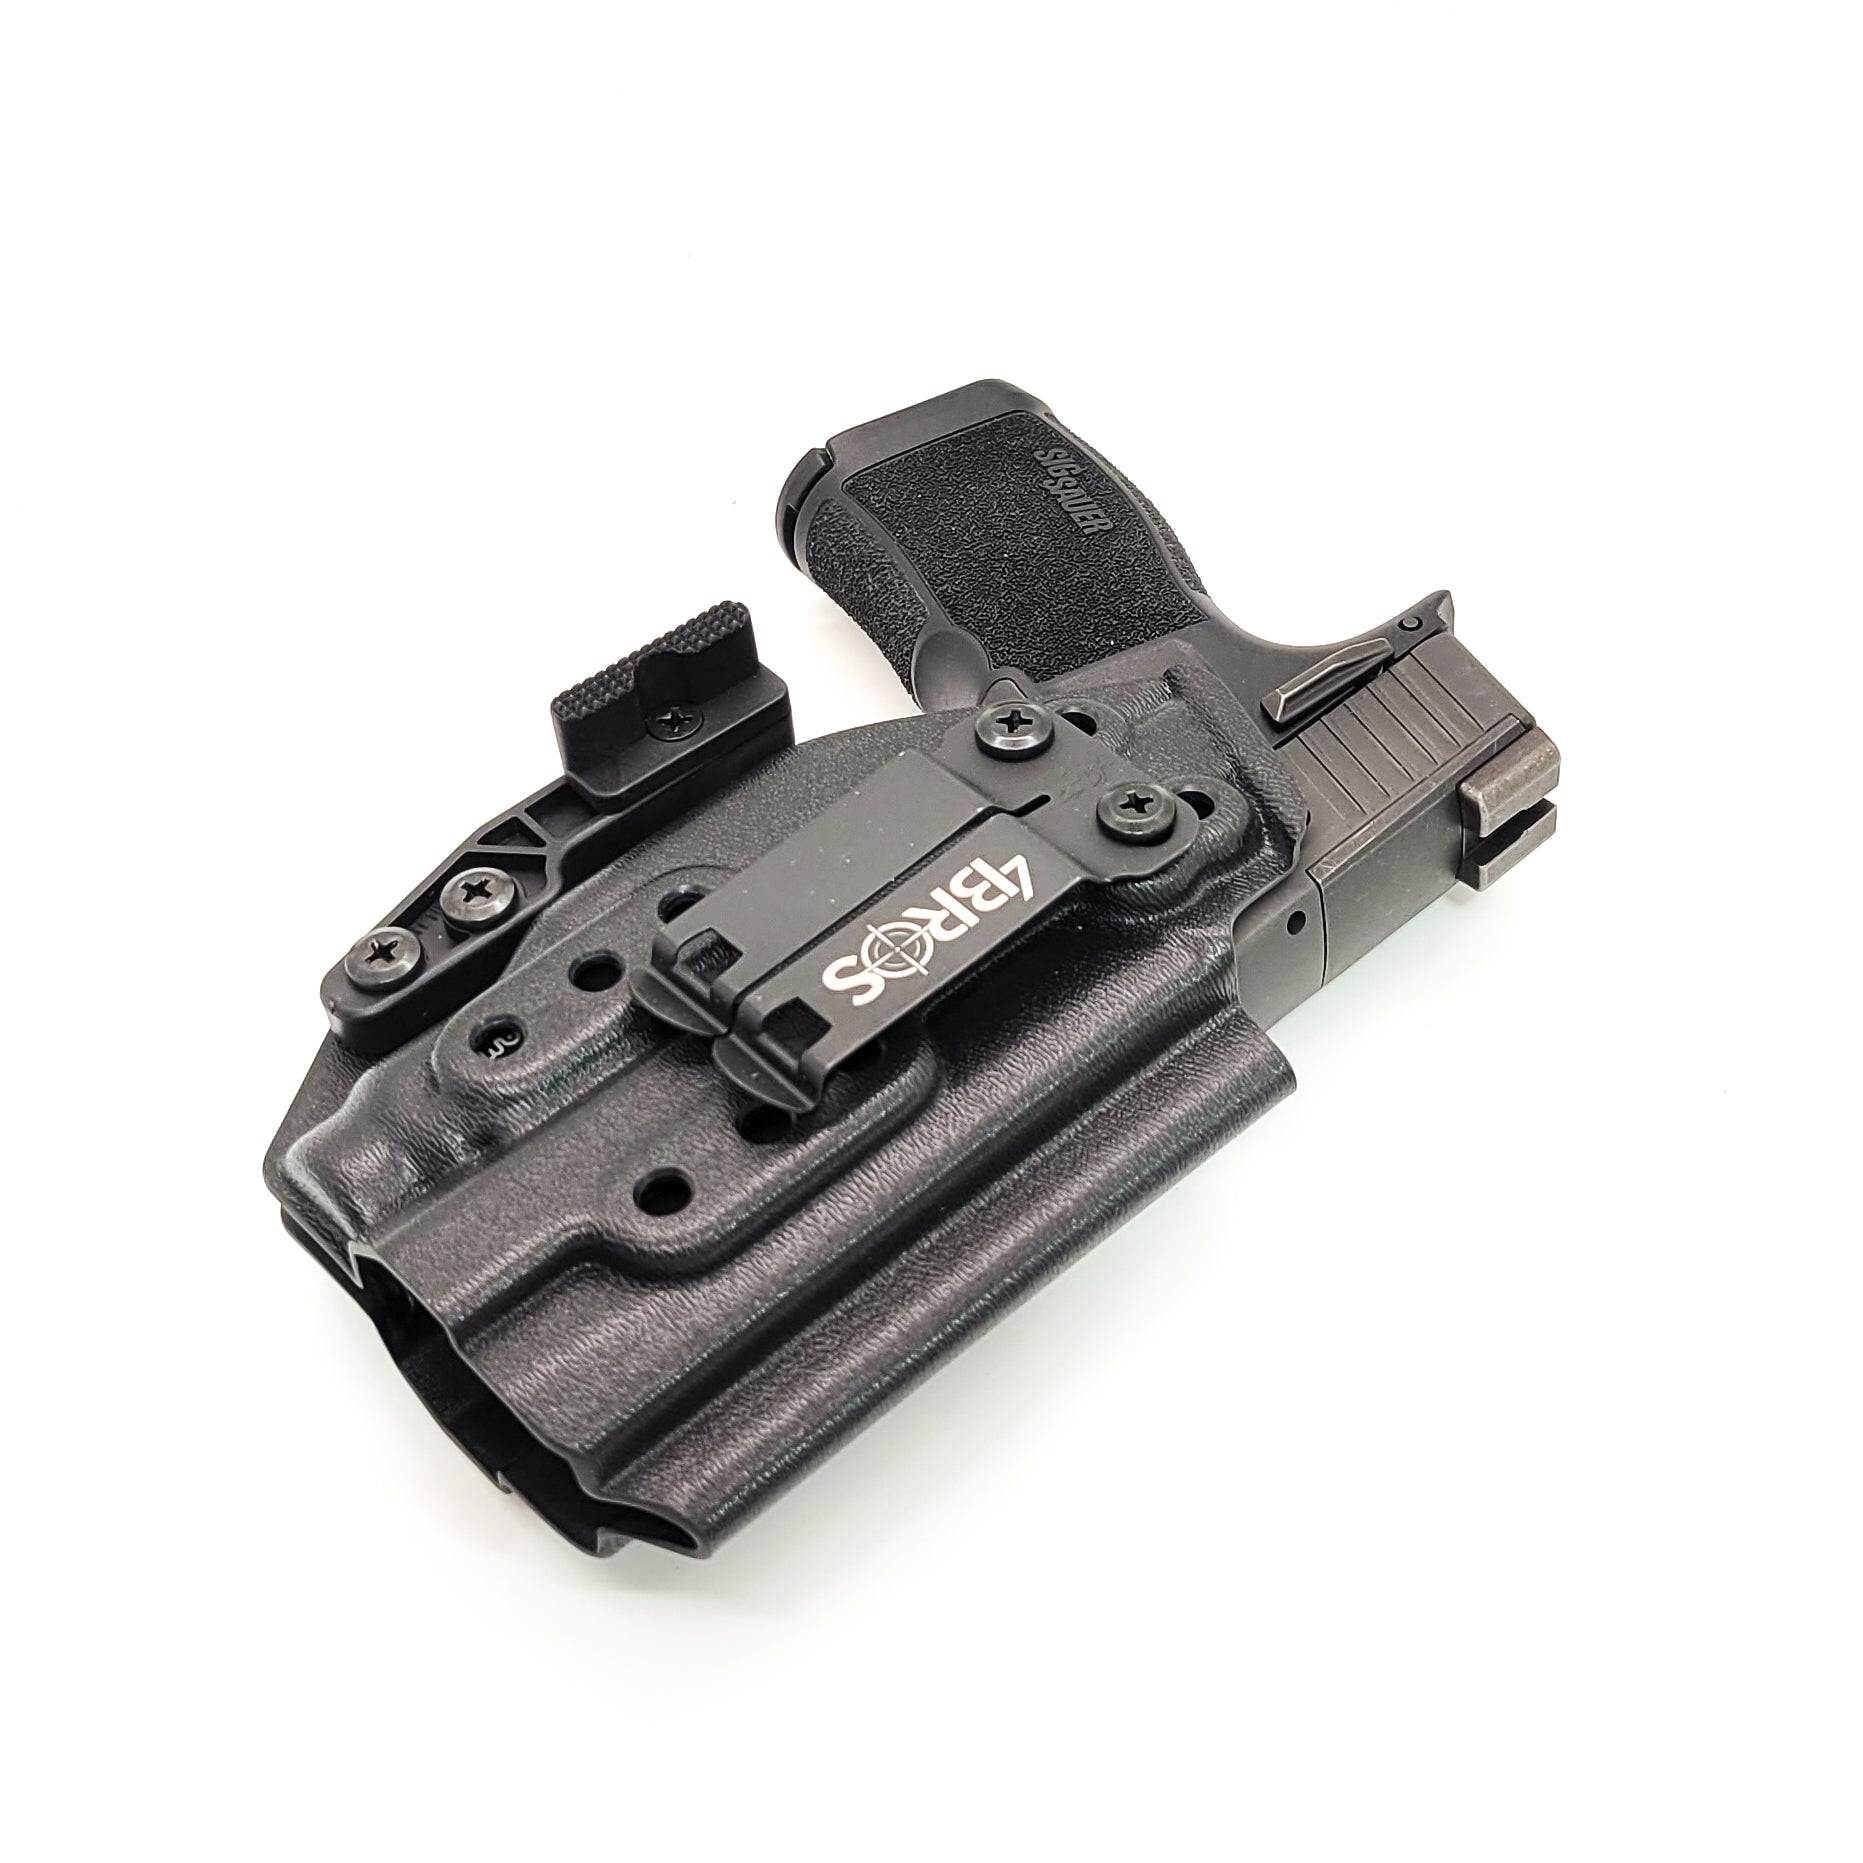 Inside waistband kydex holster designed to fit the Sig Sauer P365 or P365XL pistol with the Tactical Development Pro Ledge Tactical Application Rail and Streamlight TLR-7 Sub on the weapon. This holster will fit the Sig P365, P365X, P365XL Spectre, P365 XL RomeoZero, P365X RomeoZero, P365 SAS and P365XL Spectre Comp.